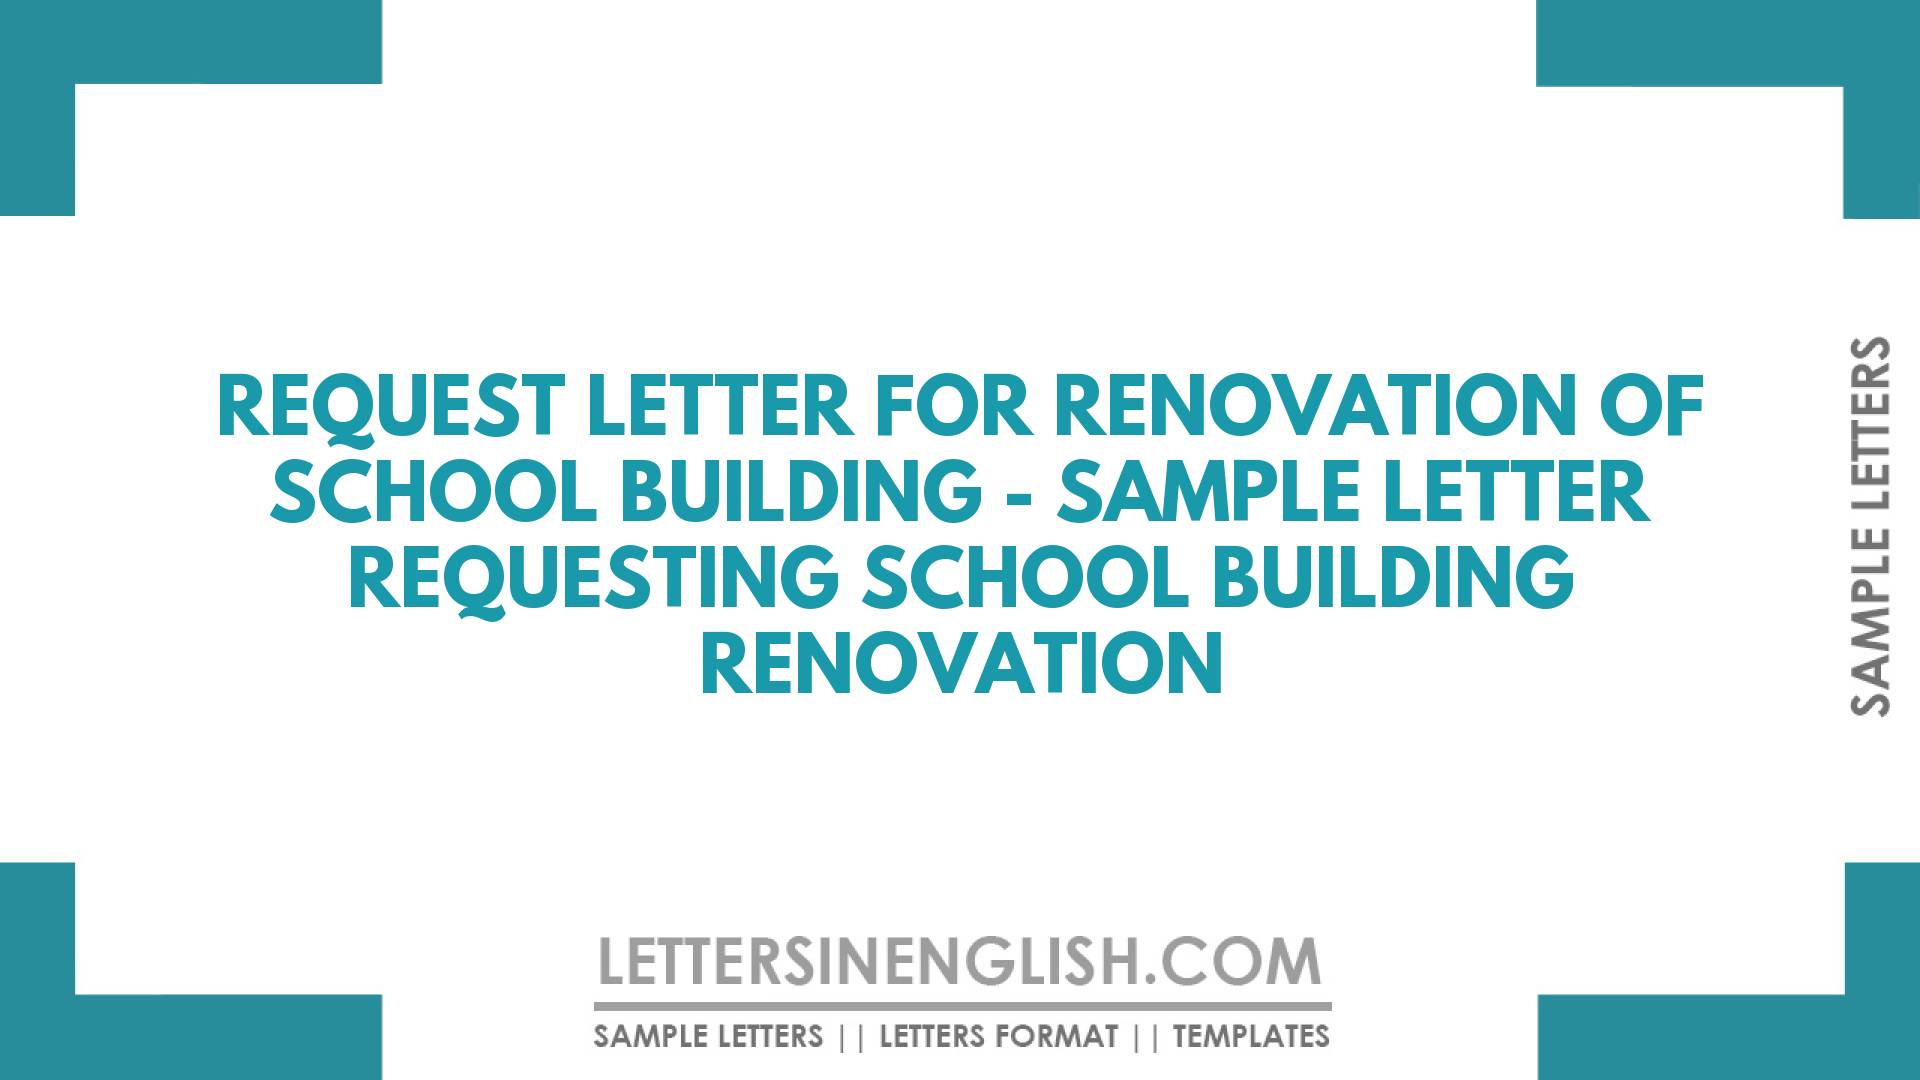 Request Letter for Renovation of School Building – Sample Letter Requesting School Building Renovation